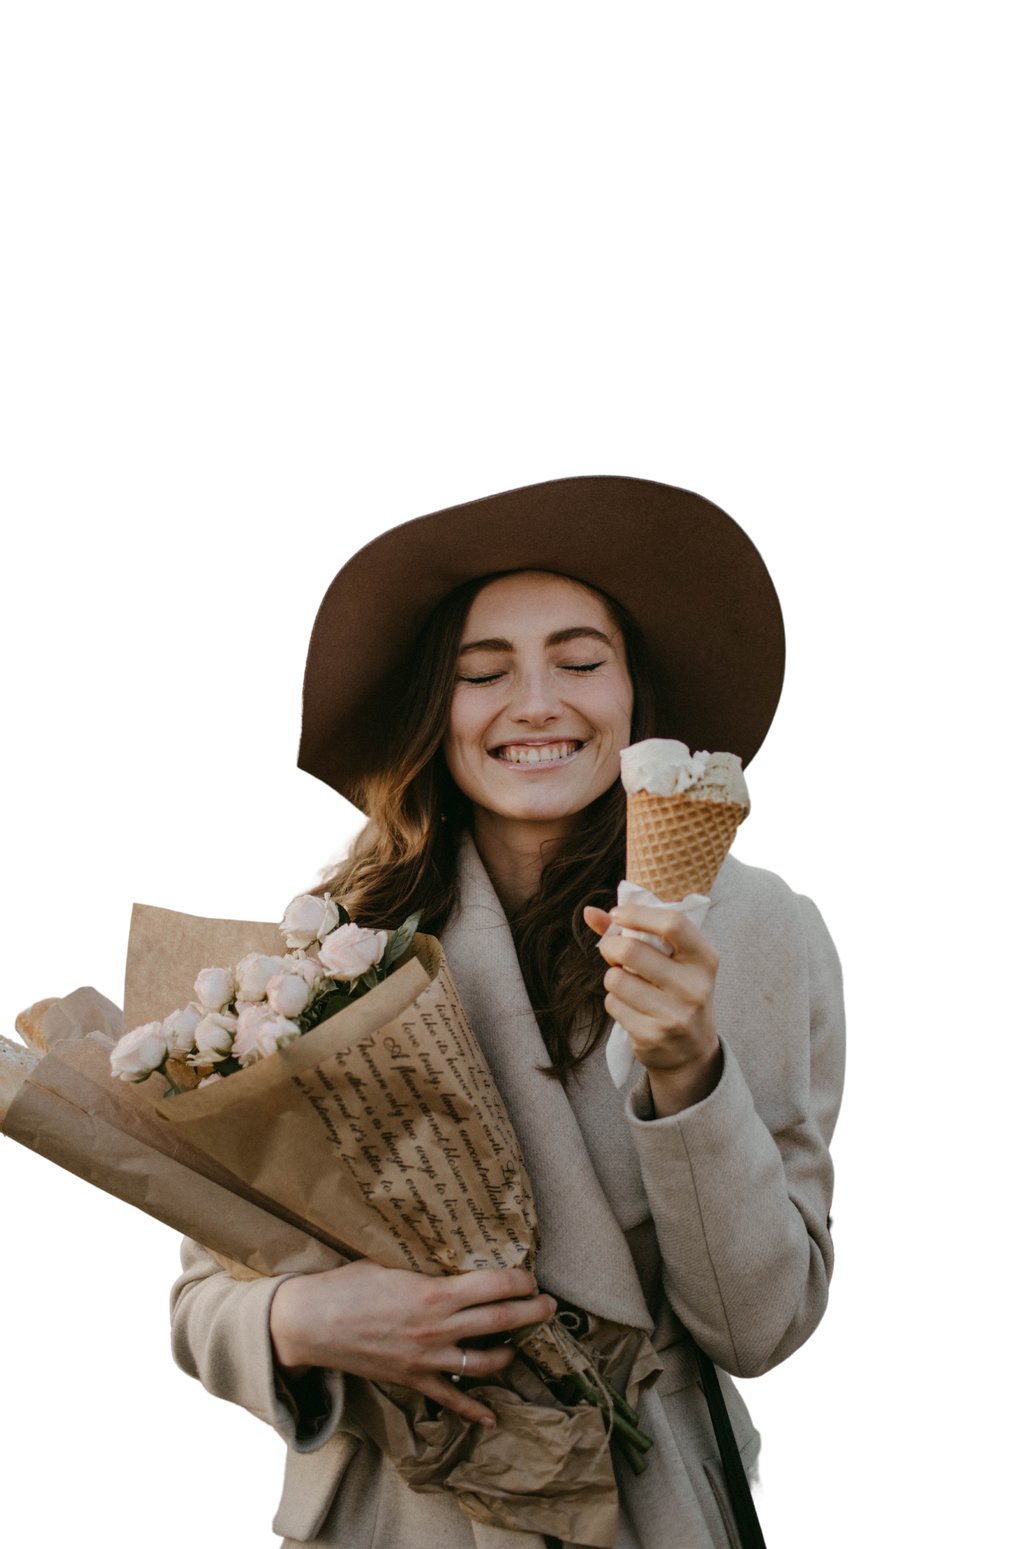 Woman Wearing Brown Coat Holding White Flower Bouquet And Ice Cream